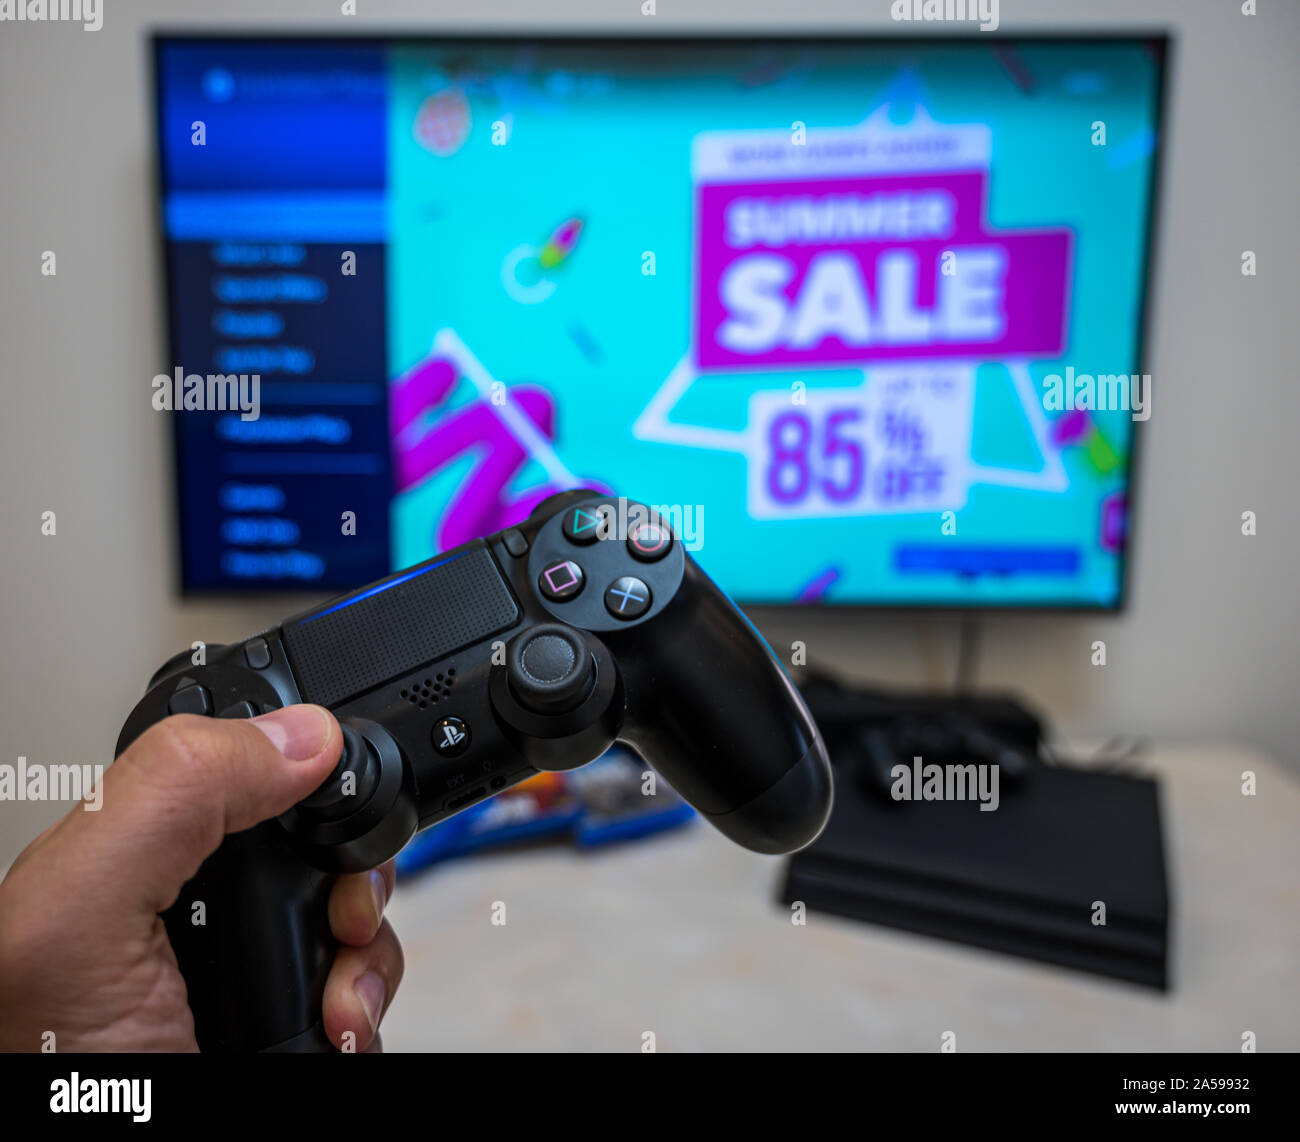 Summer sale in PS4 play store. Pre-order, download, play Sony Play Station 4 Pro game on the big LCD screen at home. Stock Photo